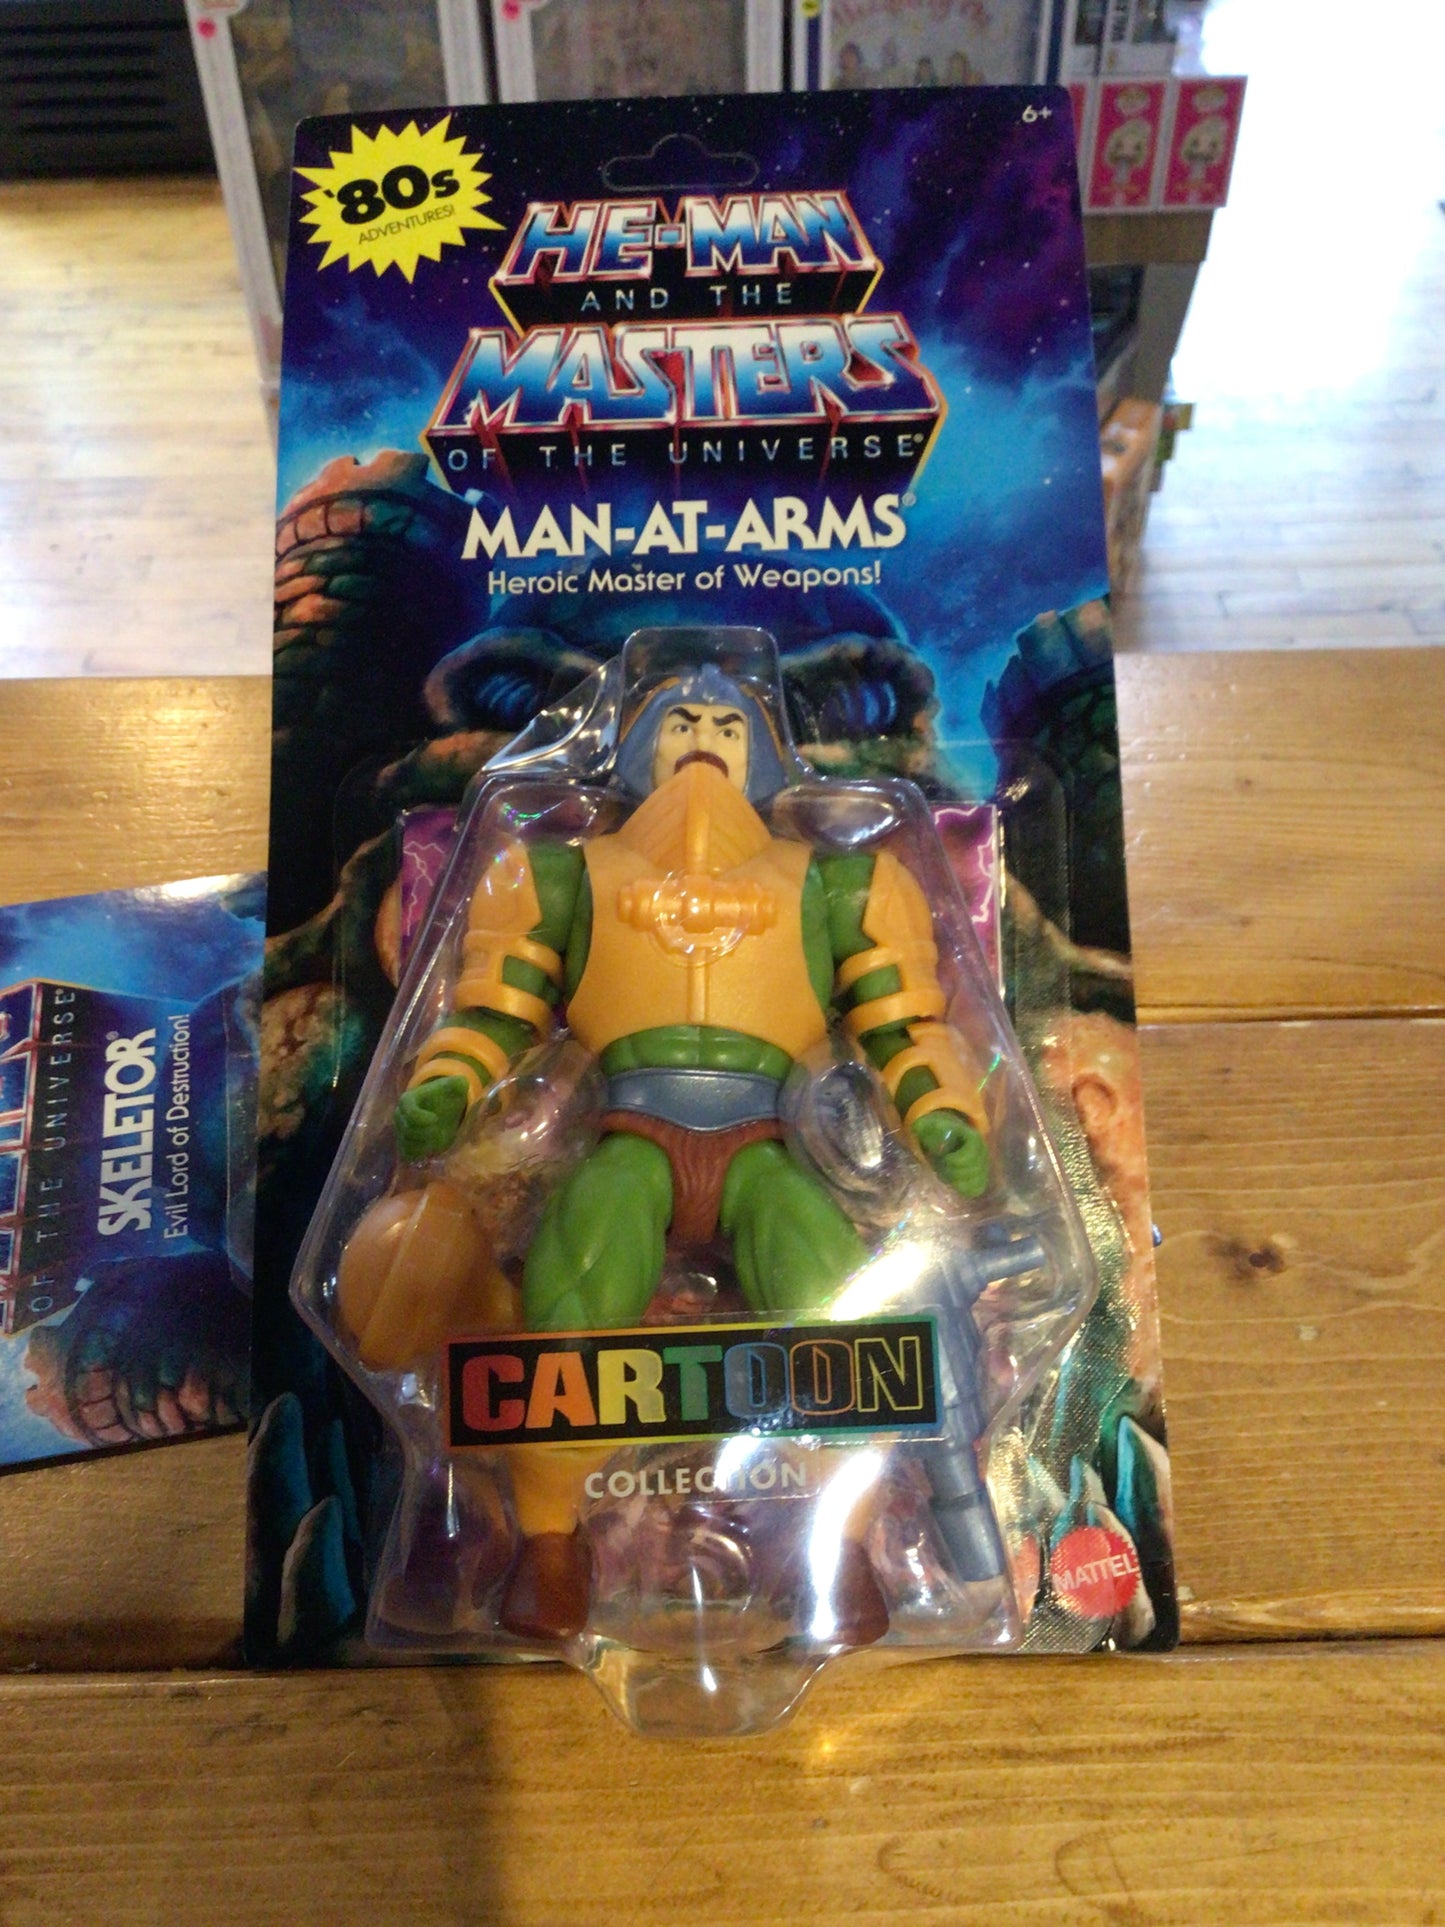 MOTU Masters of the Universe - Man-at-Arms Mattel retro Action Figure - Cartoon Collection